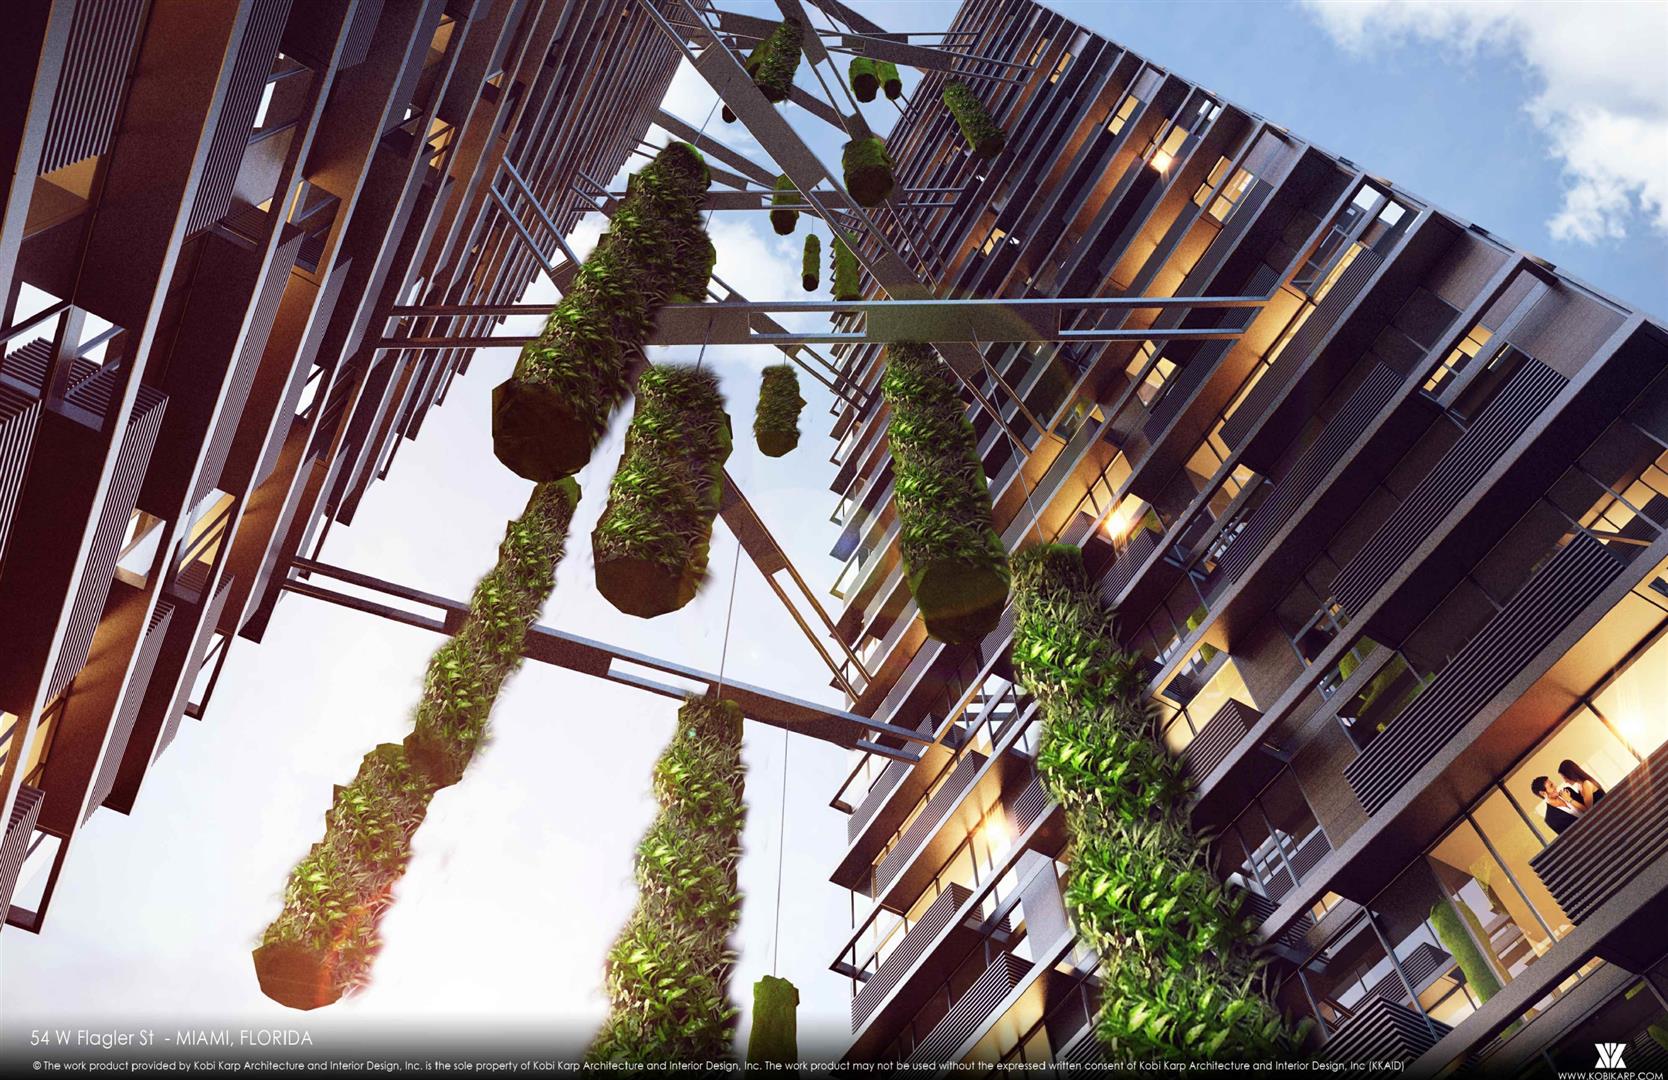 Twin Towers With ‘Secret’ Hanging Garden Proposed for Flagler Street